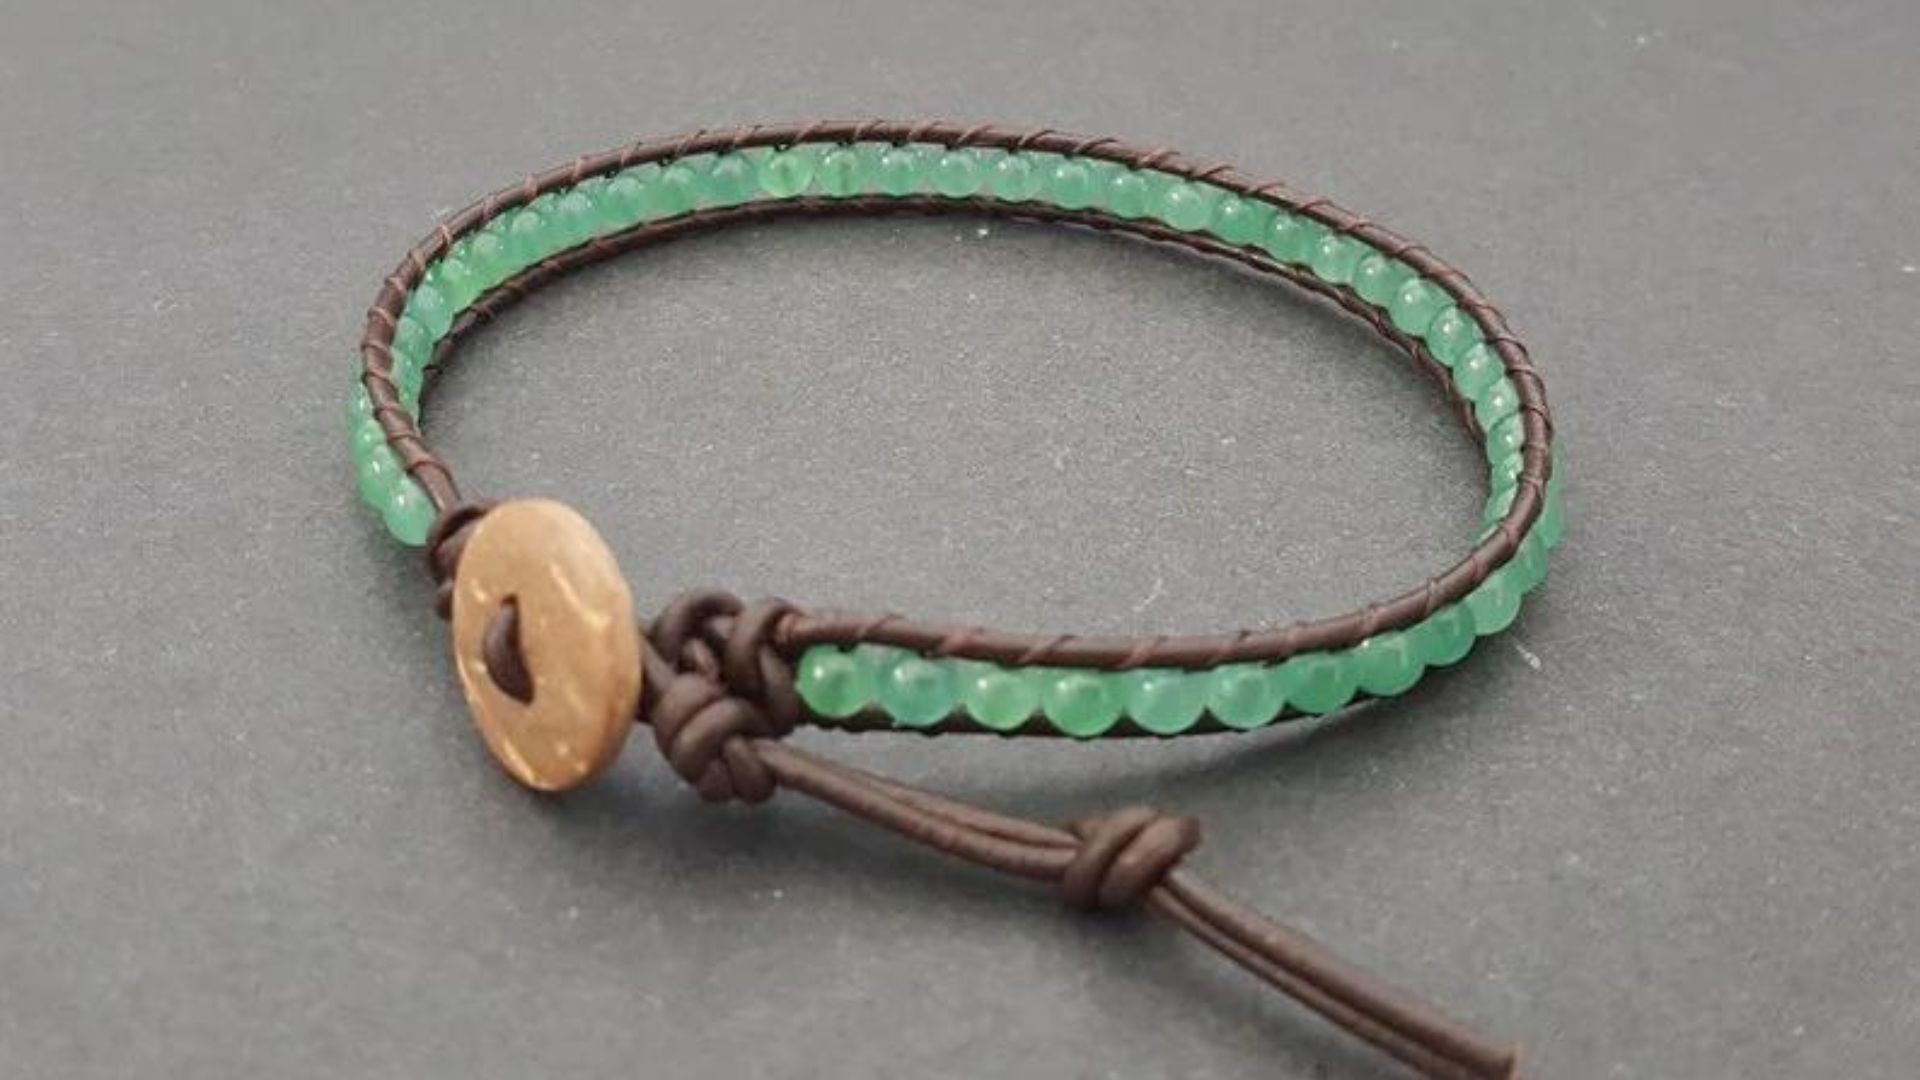 Green Beads In A Leather Bracelet